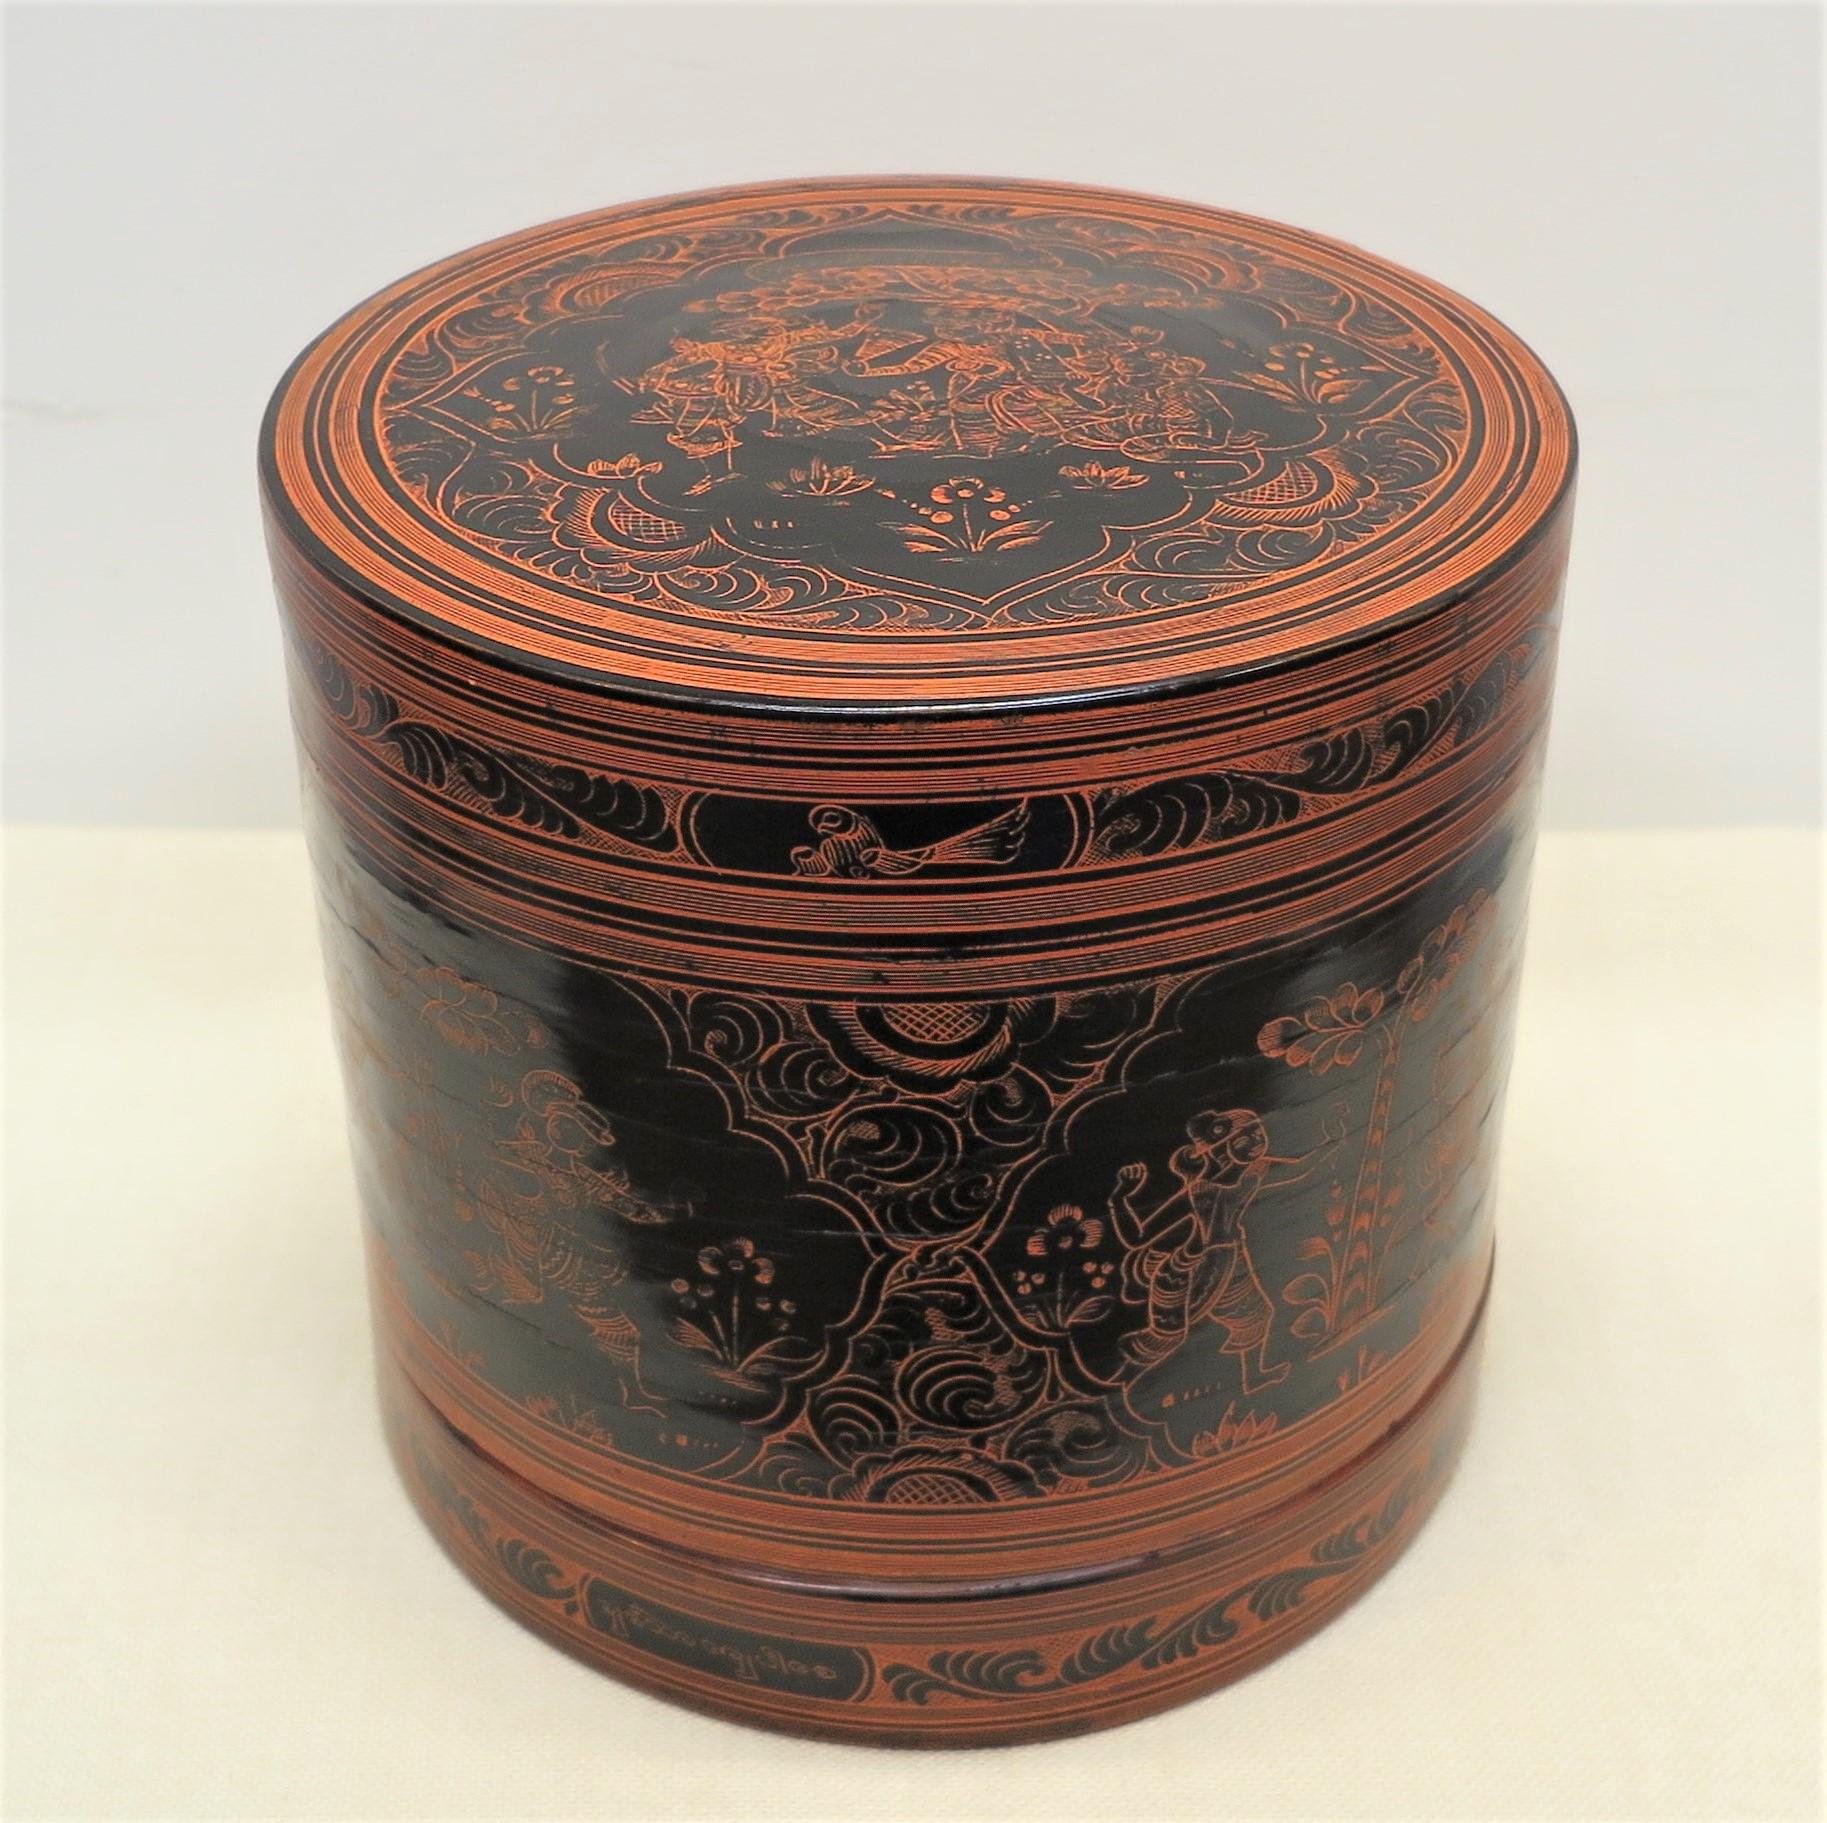 Burmese antique lacquerware betel box. Individual Betel Box authentic Burmese Folk Art know as Kun- It, Mandalay Period. A lacquered cylindrical body of woven turned Bamboo decorated by incised lacquer overall with Chu-pan variant motif and